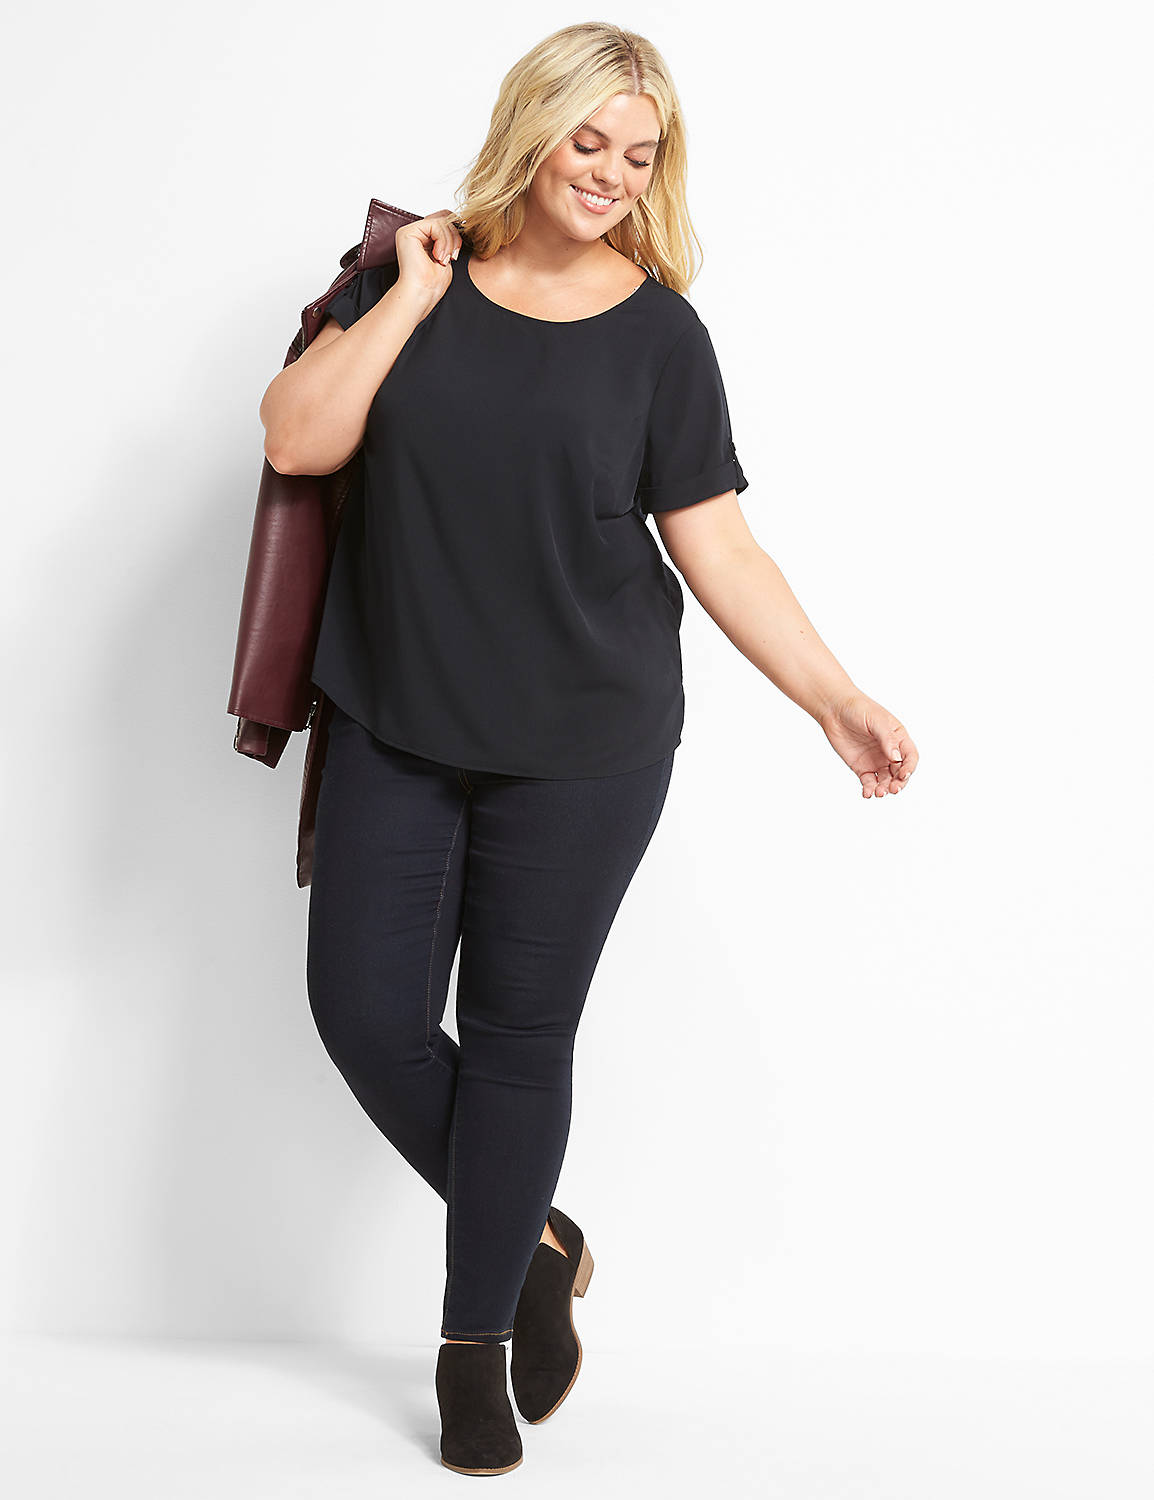 Short Sleeve Roll Cuff Crew Neck Top 1122473:Ascena Black:14 Product Image 3